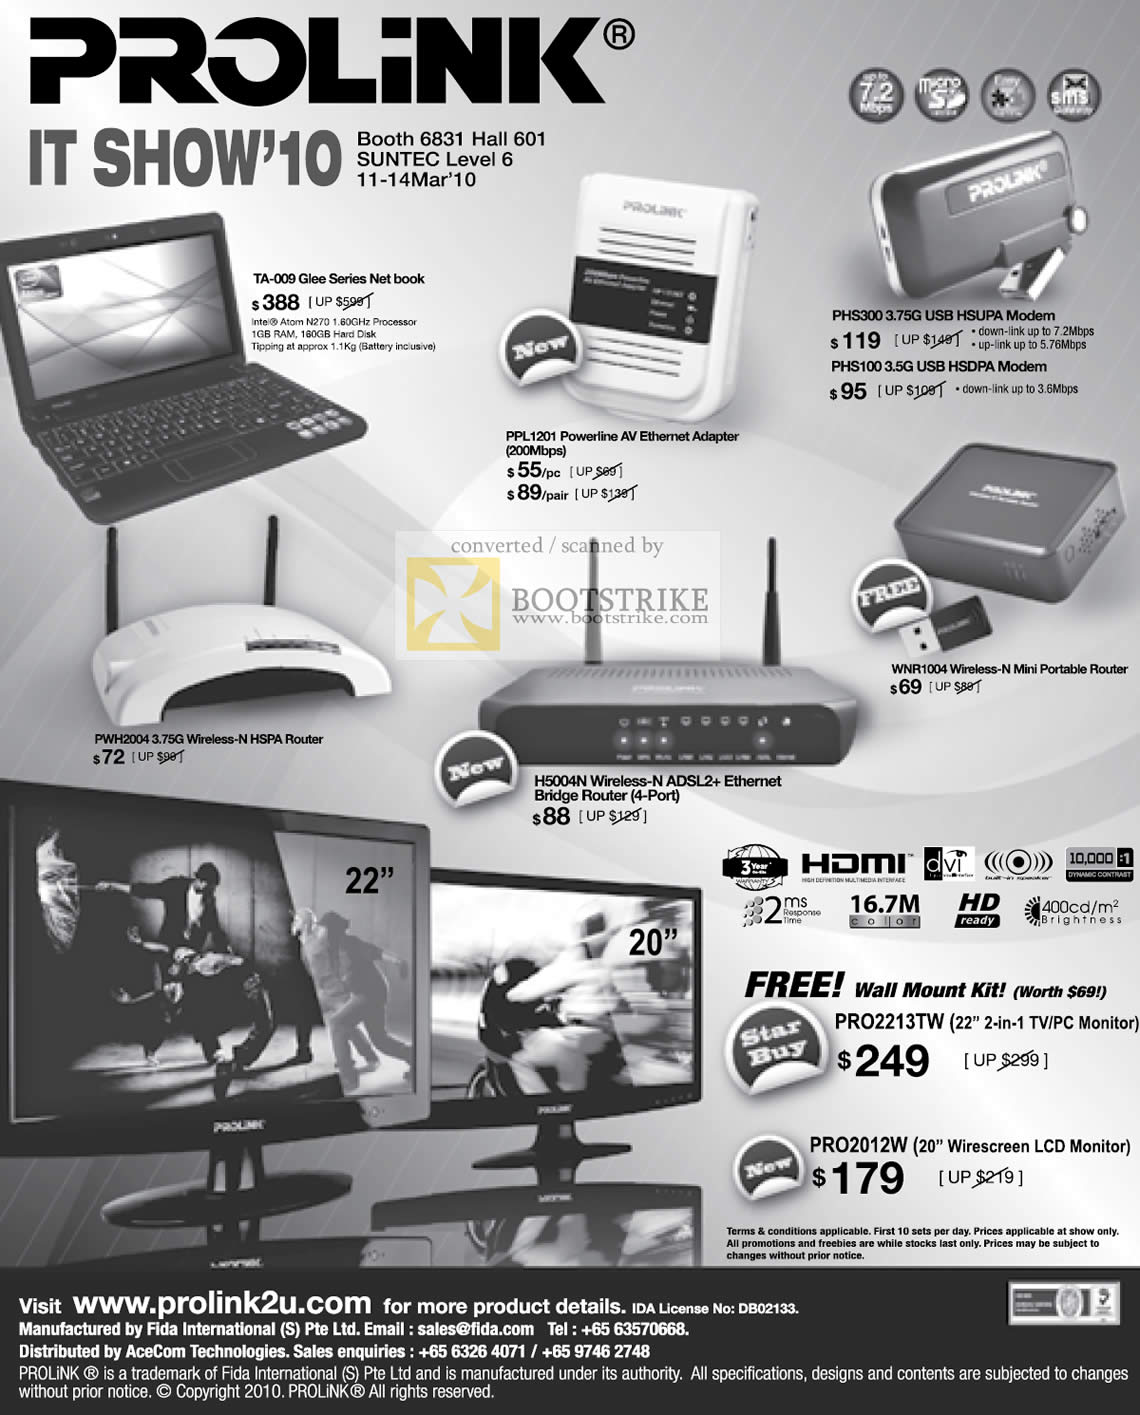 IT Show 2010 price list image brochure of Prolink Netbook TA 009 Glee Series PPL1201 Powerline Ethernet WNR1004 Portable Router PWH2004 H5004N TV Monitor PRO2213TW PRO2012W